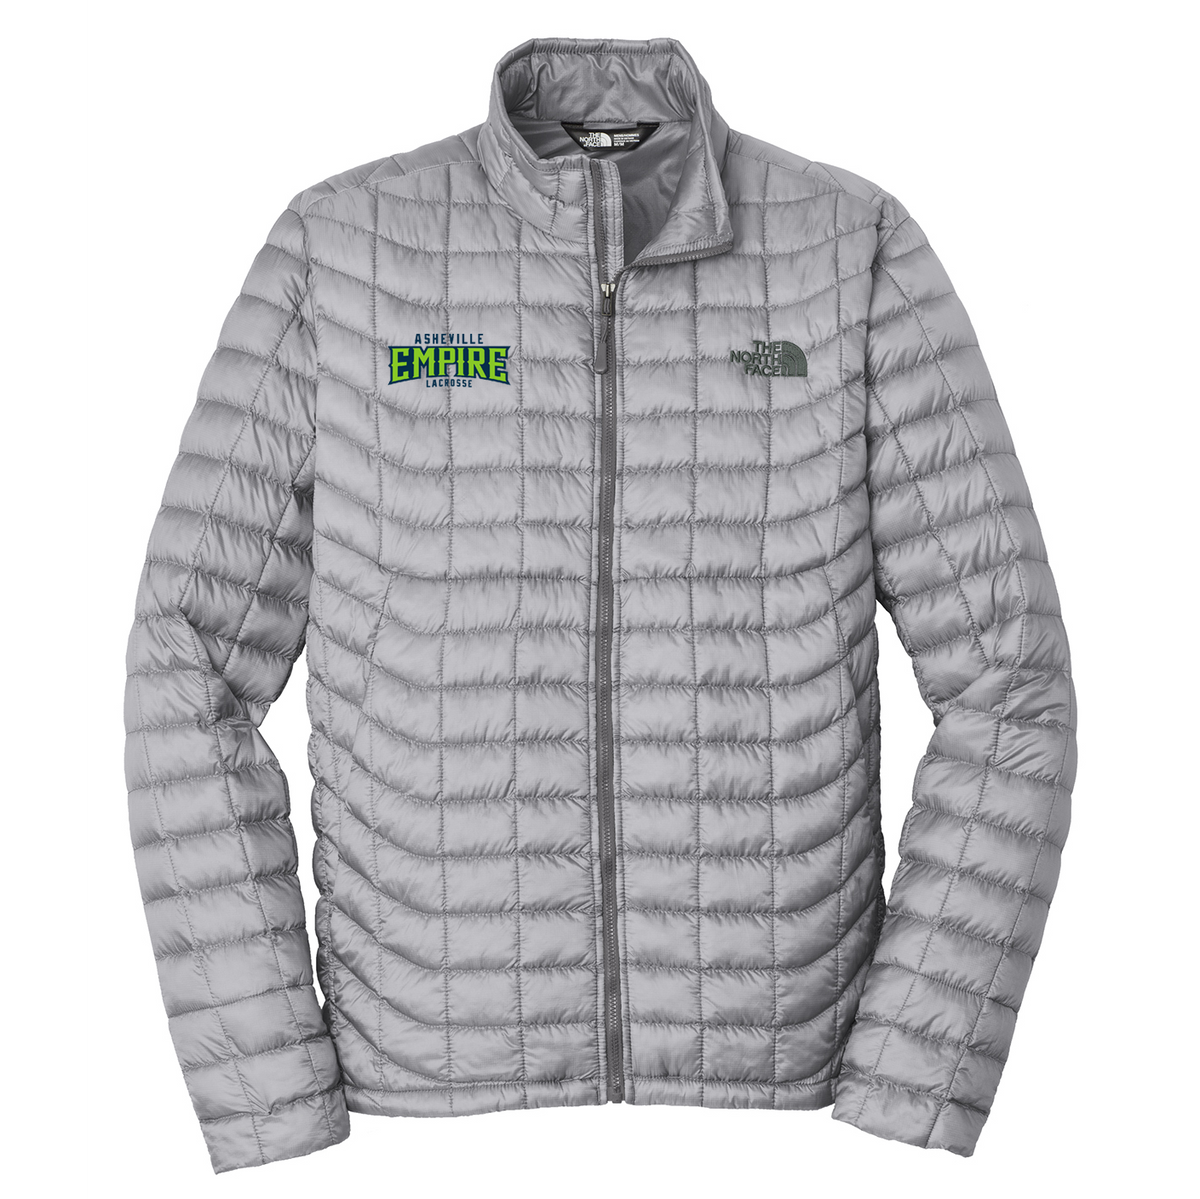 Asheville Empire Lacrosse The North Face ThermoBall Jacket